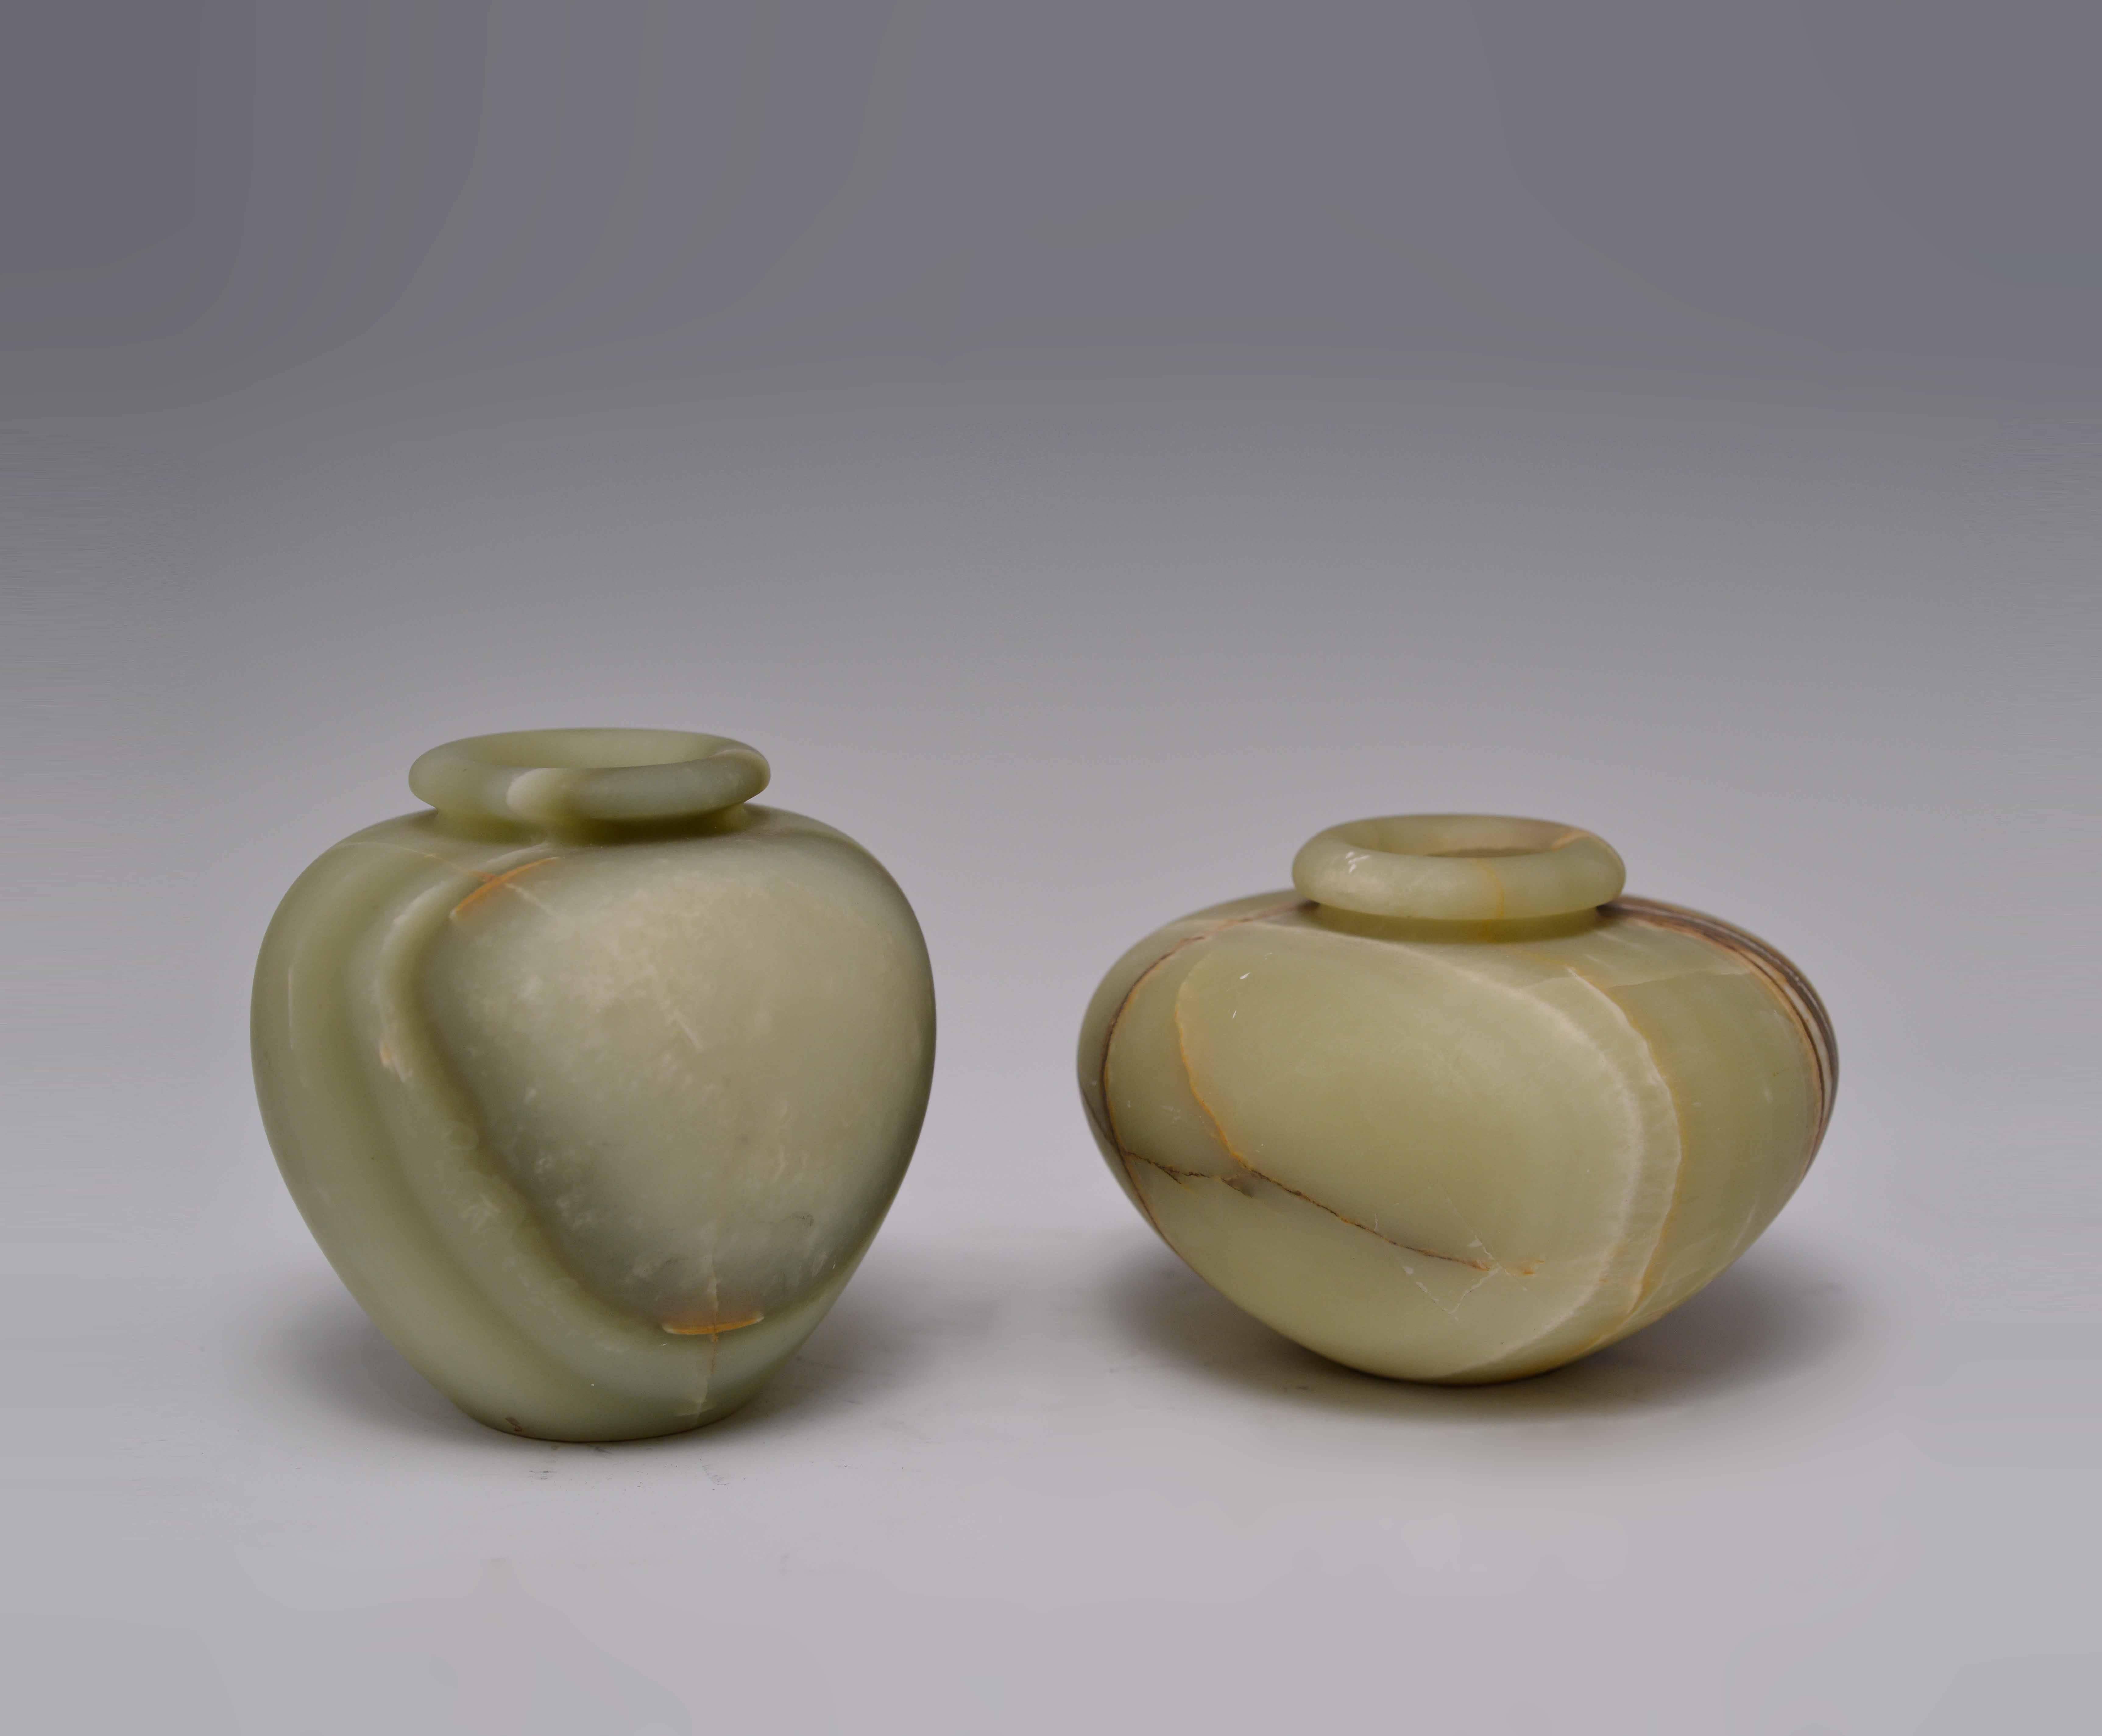 Group of two carved celadon jade baluster jars with beautiful jade veins cross the body.
Measures: Left: 7 in. H x 5 in. W
Right: 6 in. H x 6 in. W.